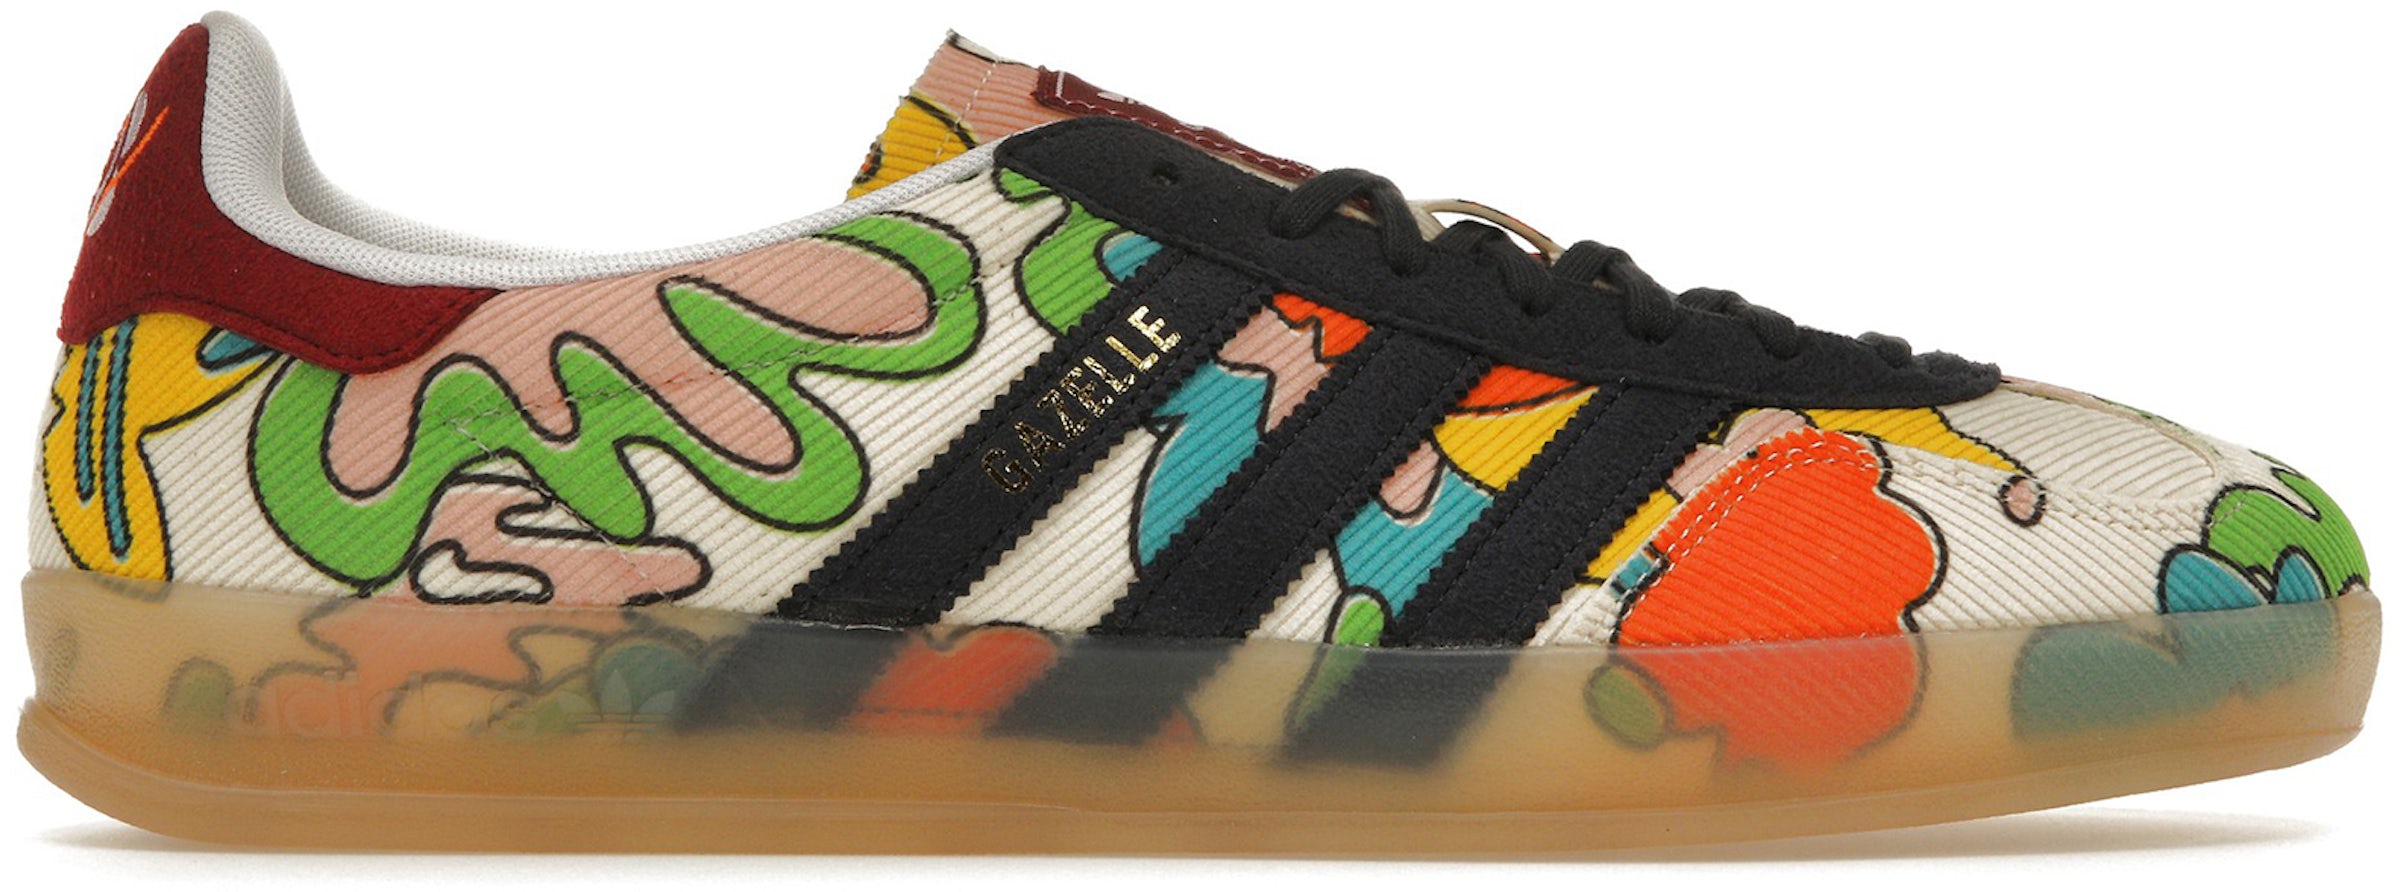 Gazelle - StockX Sneakers Shoes adidas & Buy New